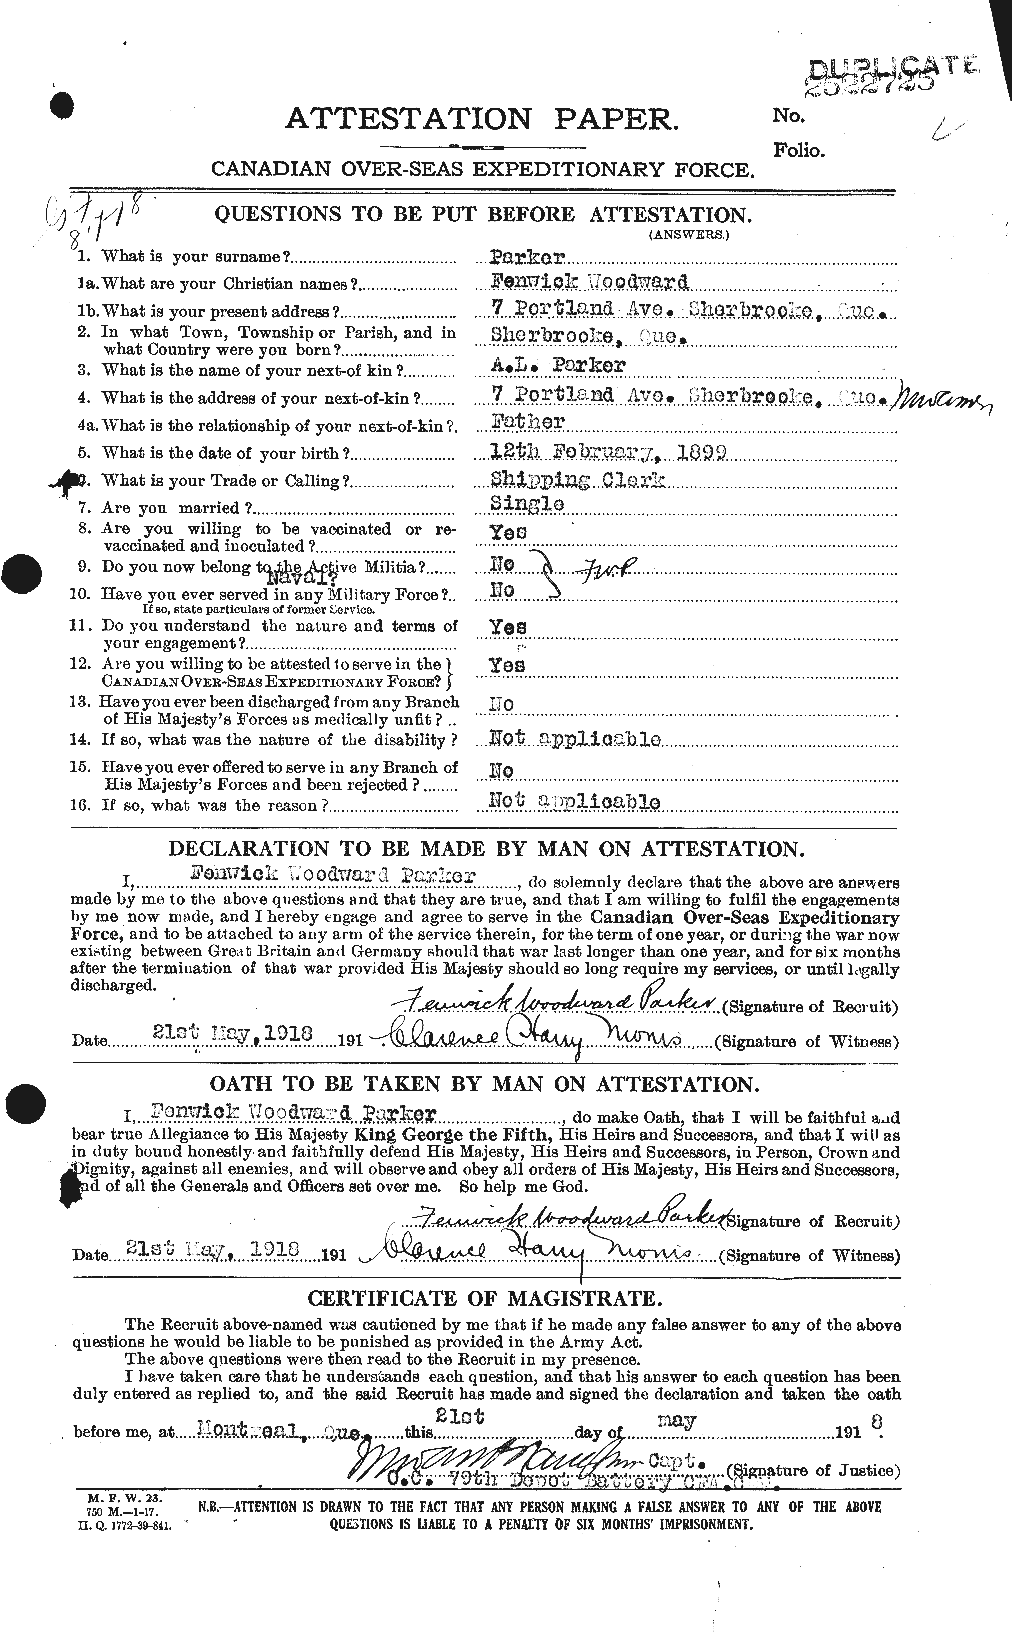 Personnel Records of the First World War - CEF 565174a